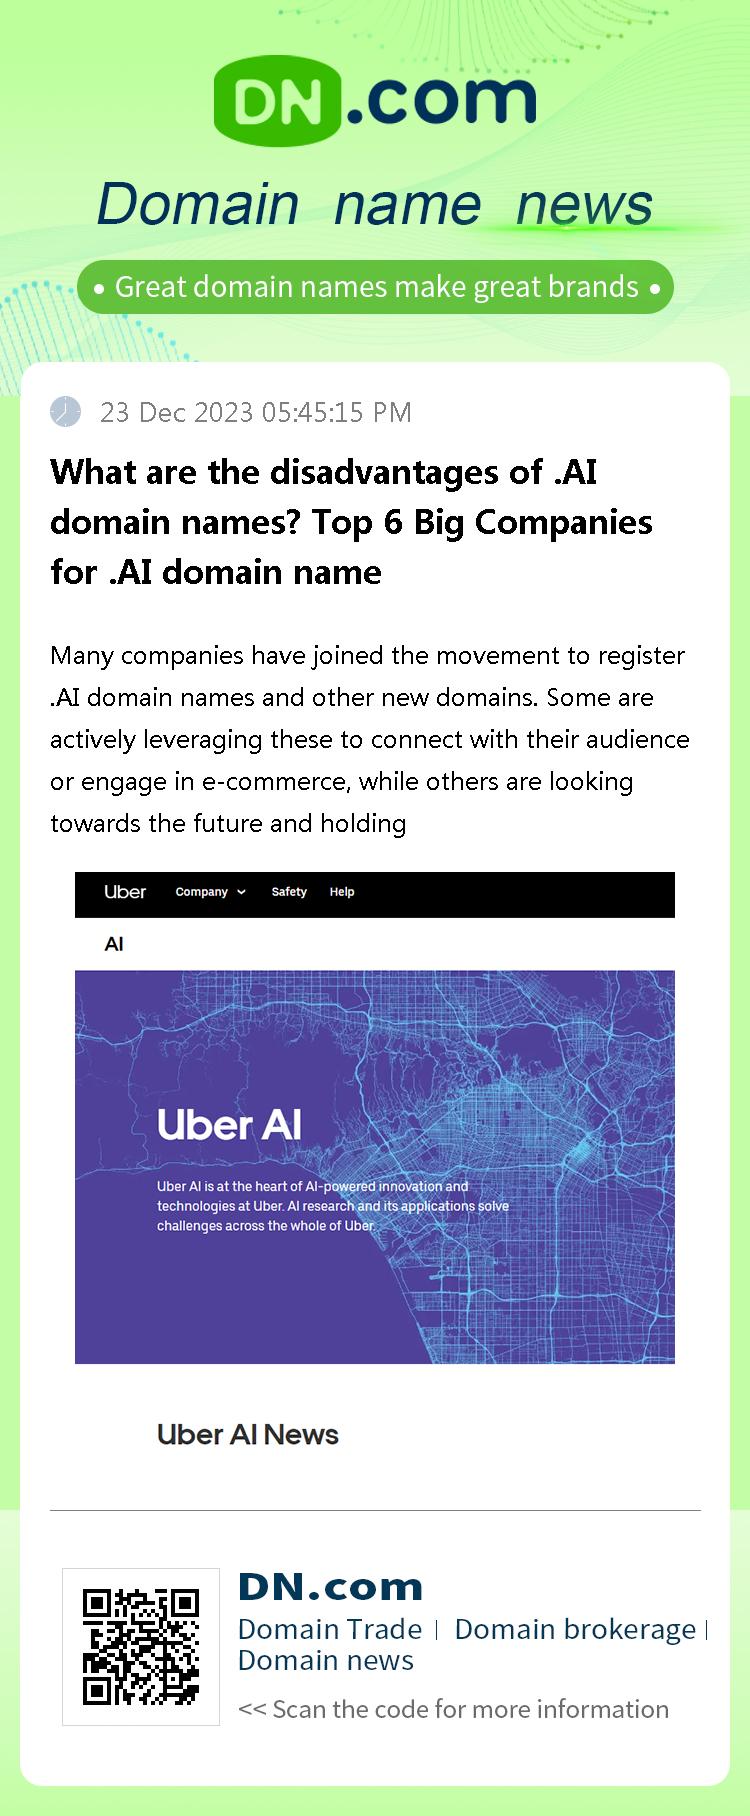 What are the disadvantages of .AI domain names? Top 6 Big Companies for .AI domain name